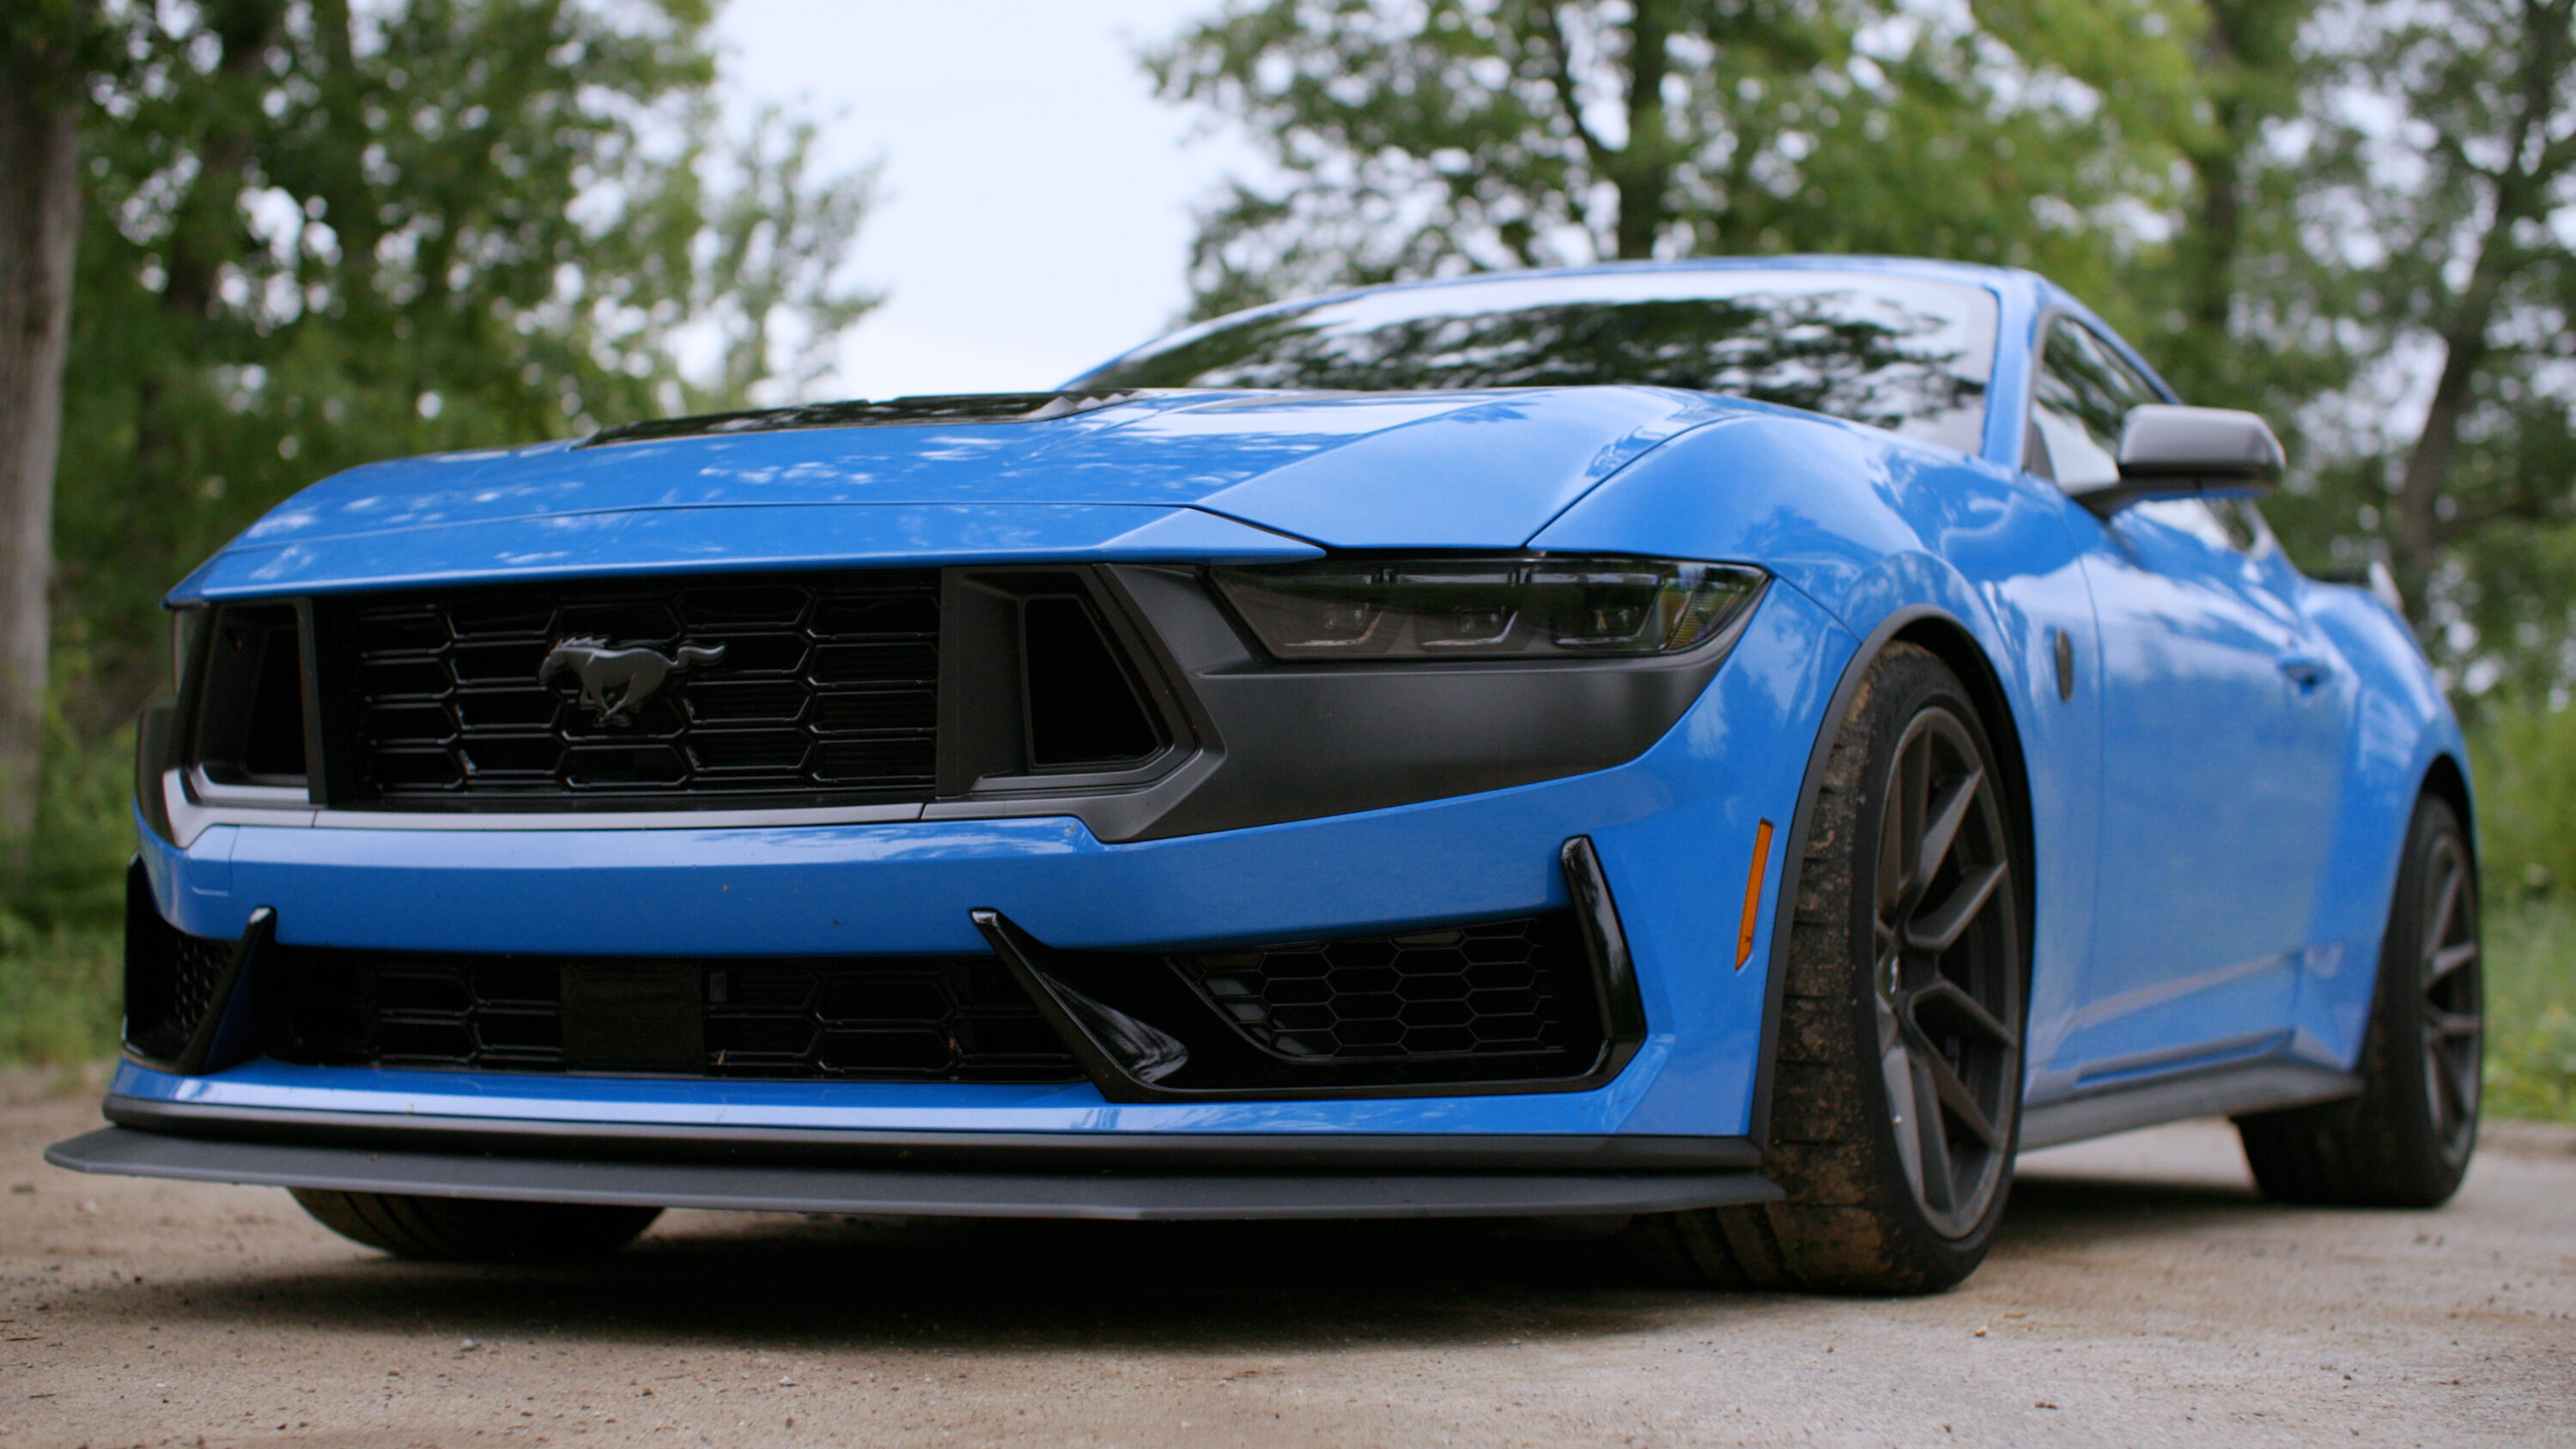 S650 Mustang Mustang Dark Horse Docu-Film by Savagegeese Incoming. Any Questions? 7